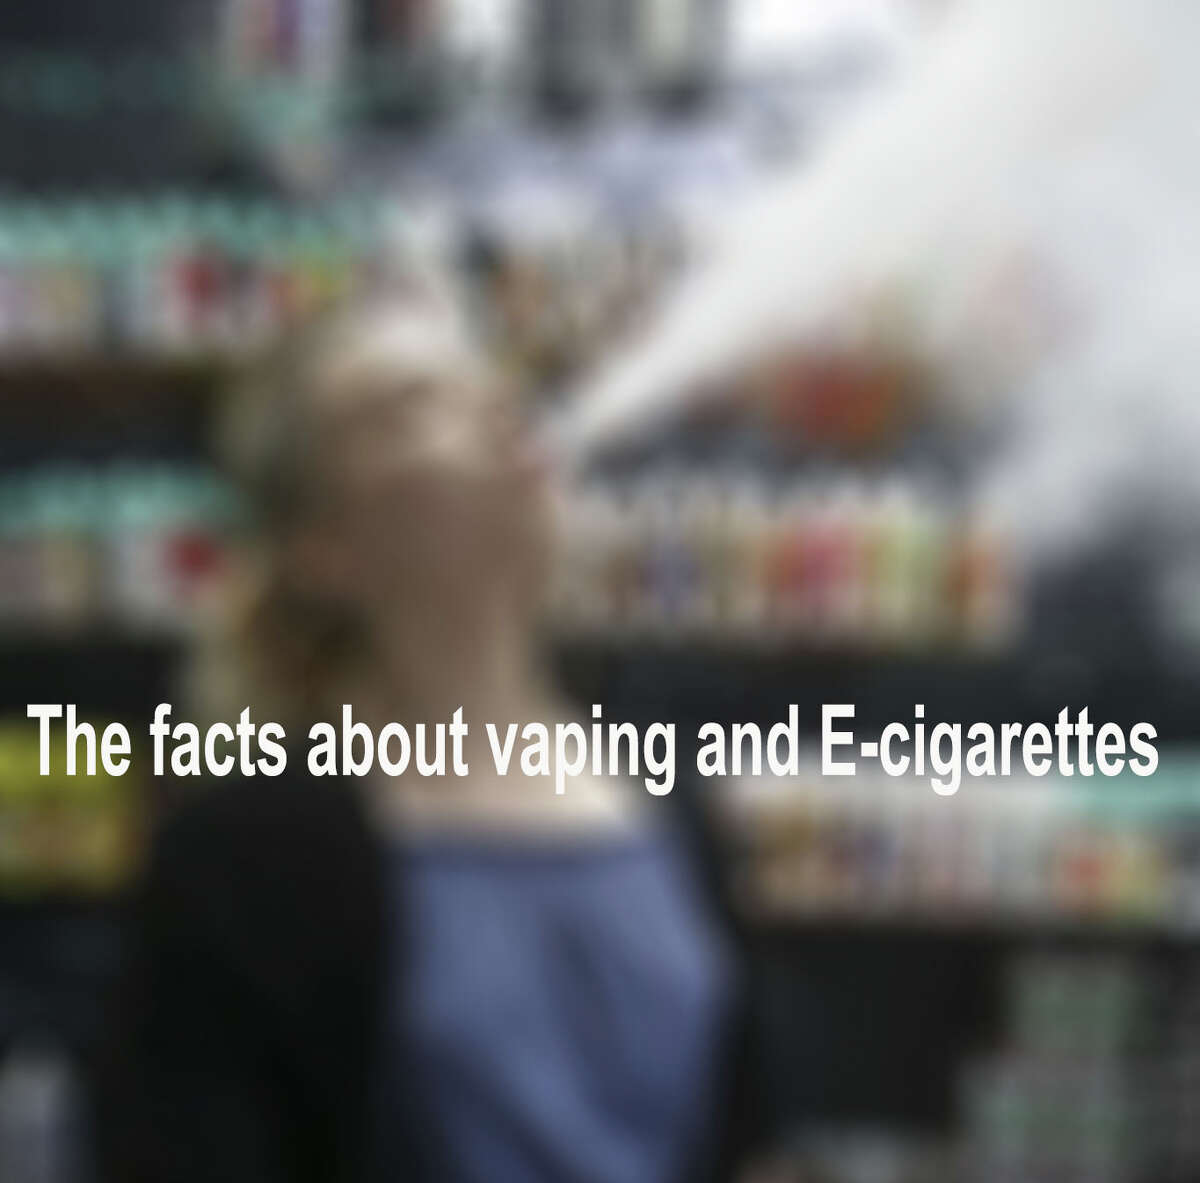 FACTS YOU NEED TO KNOW ABOUT VAPING AND E-CIGARETTES-->